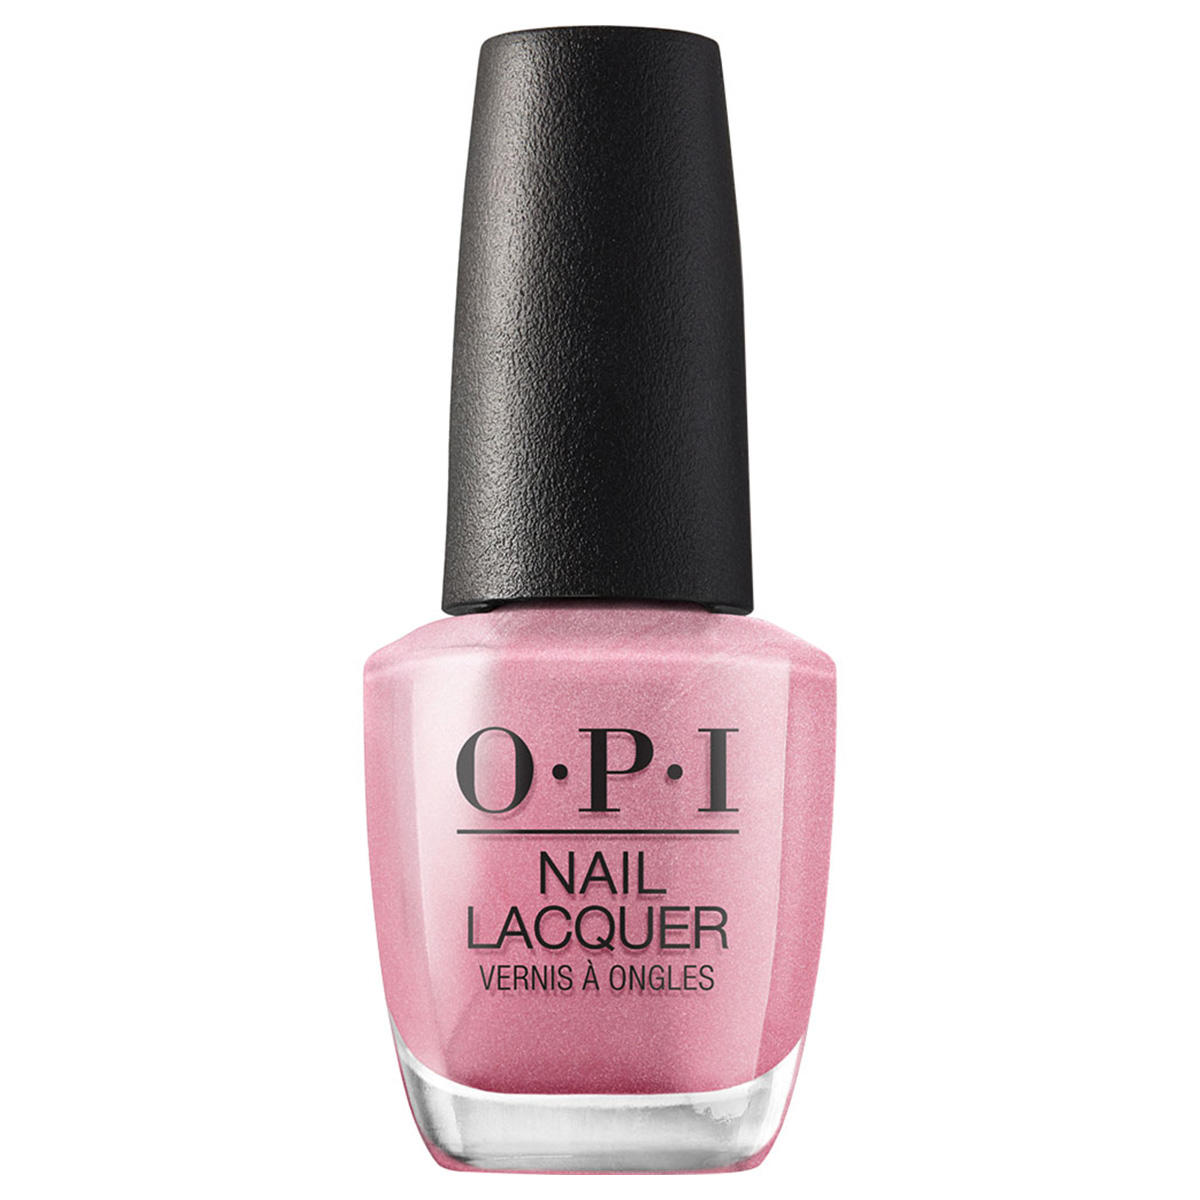 OPI Nail Lacquer Aphrodite's Pink Nightie 15 ml - 1